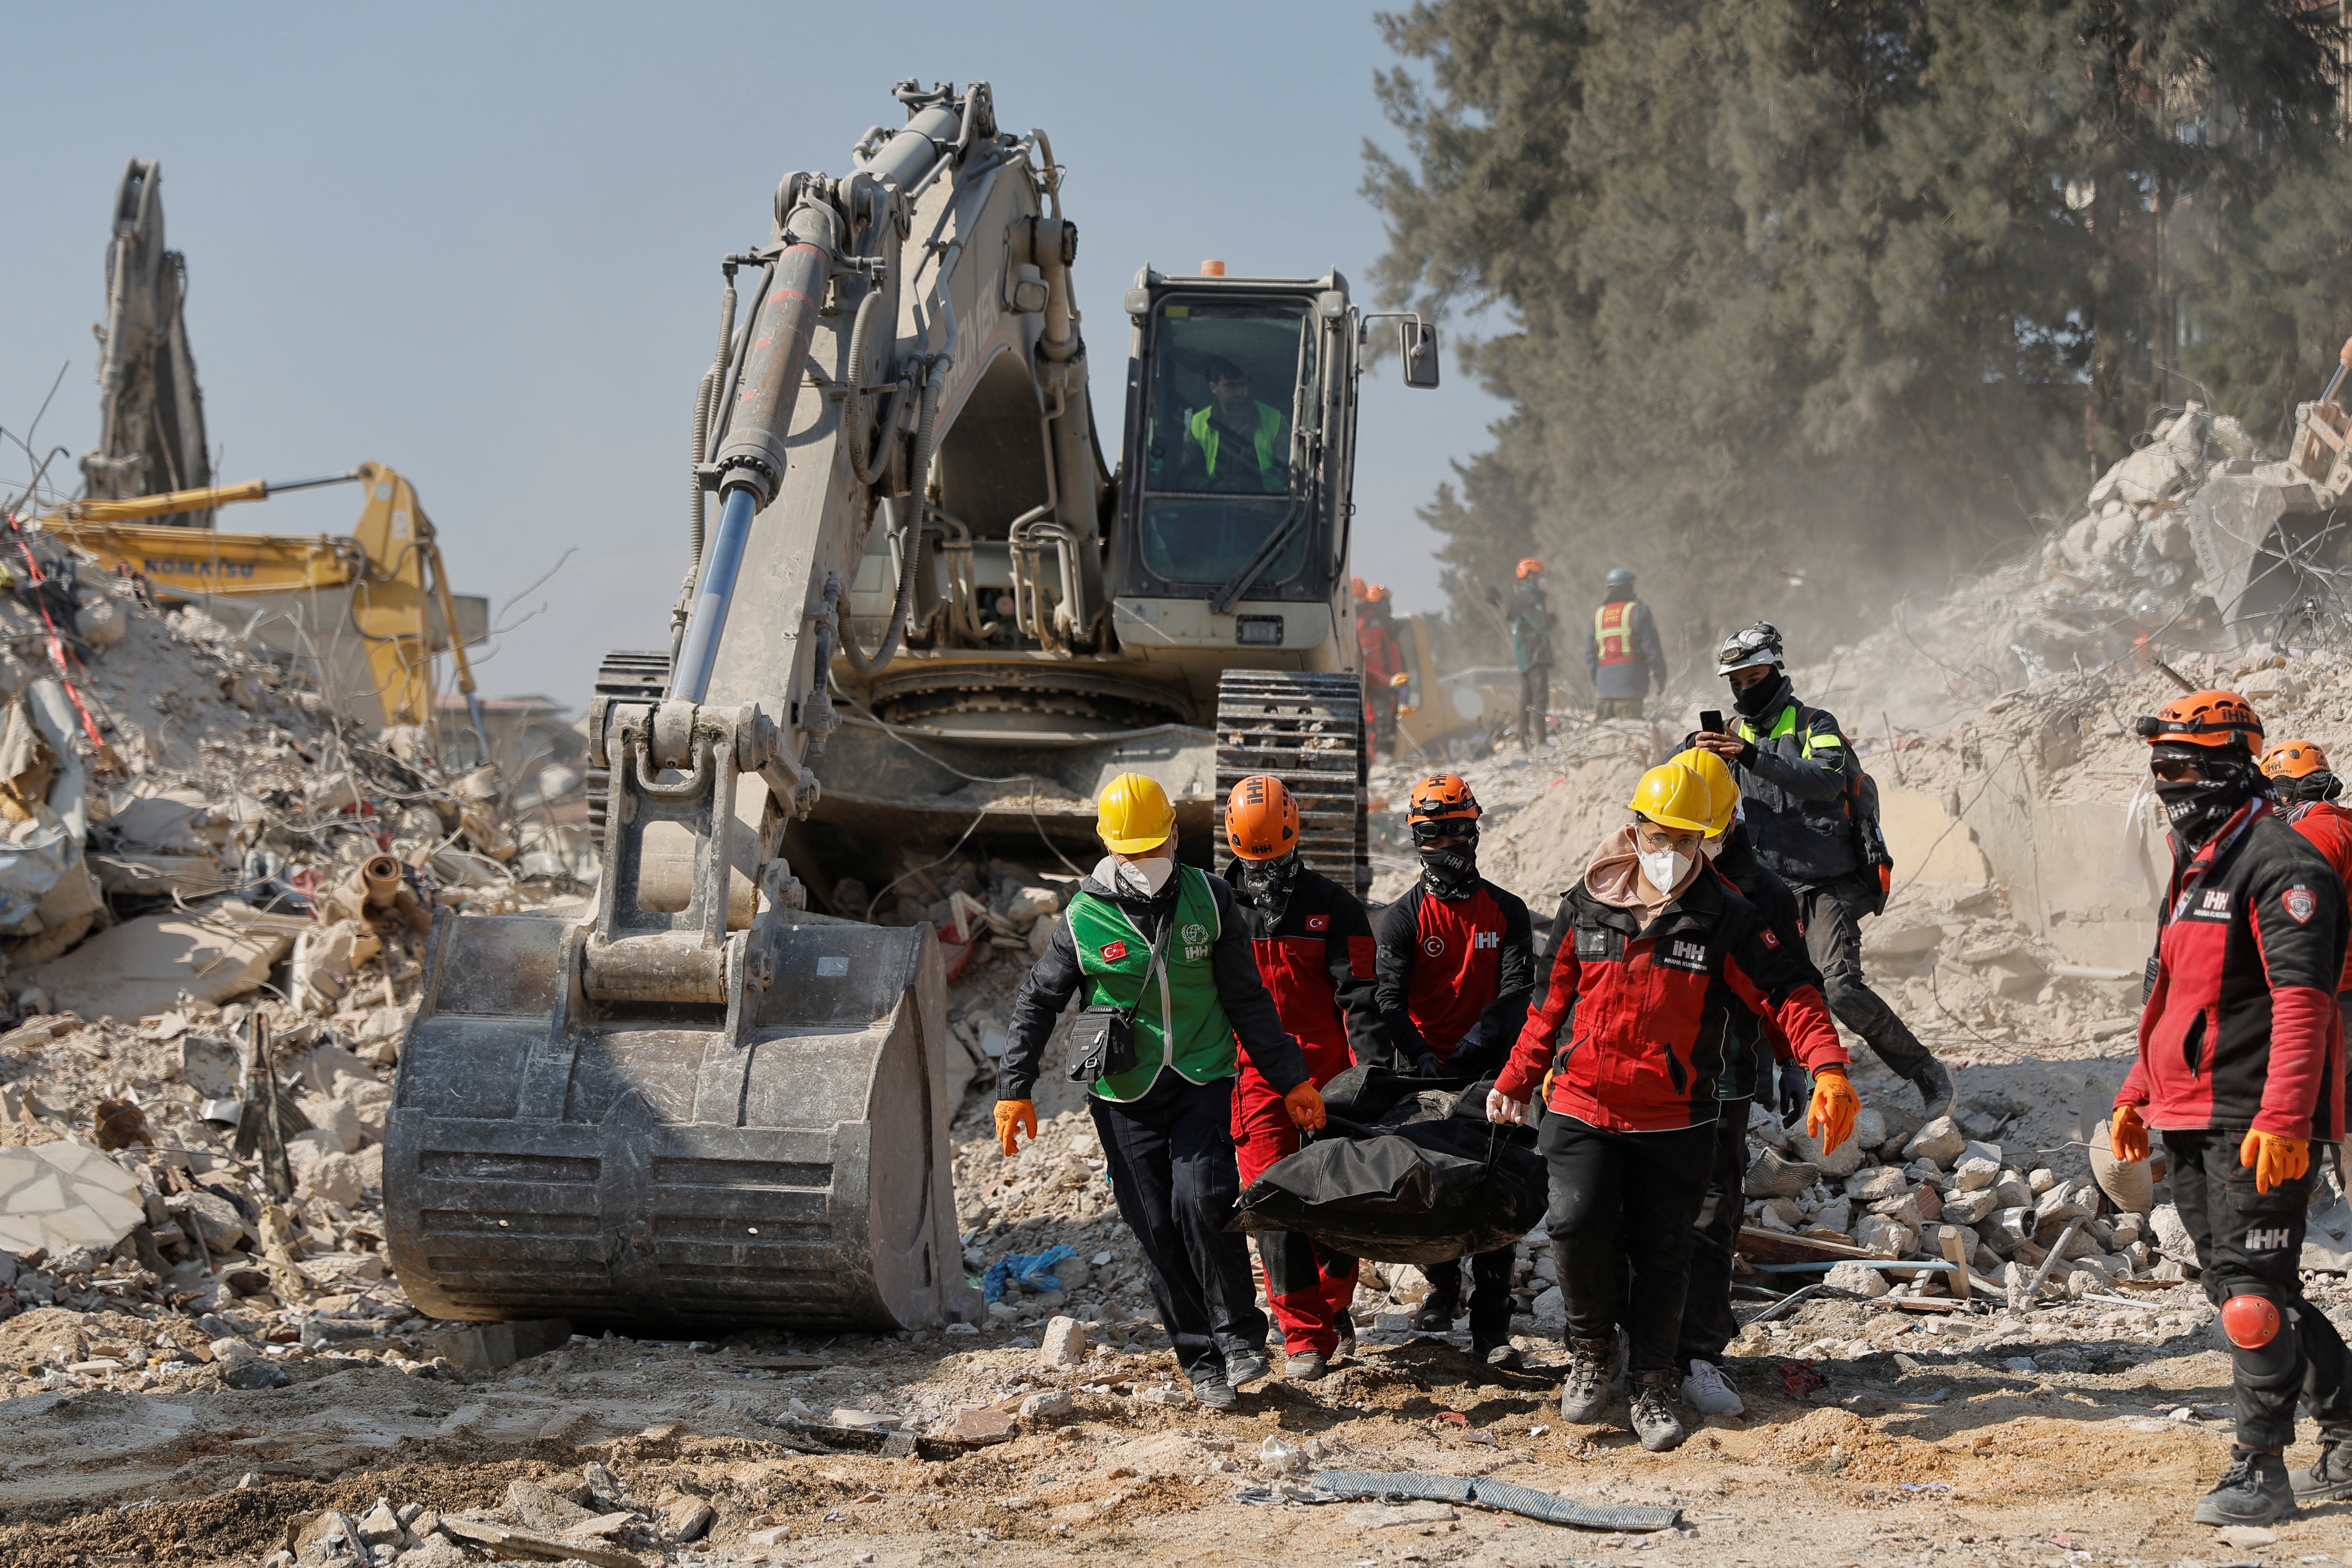 Rescuers carry the body of a victim at the site of a collapsed building, in the aftermath of the deadly earthquake, in Antakya, Turkey February 18, 2023. Photo: Reuters